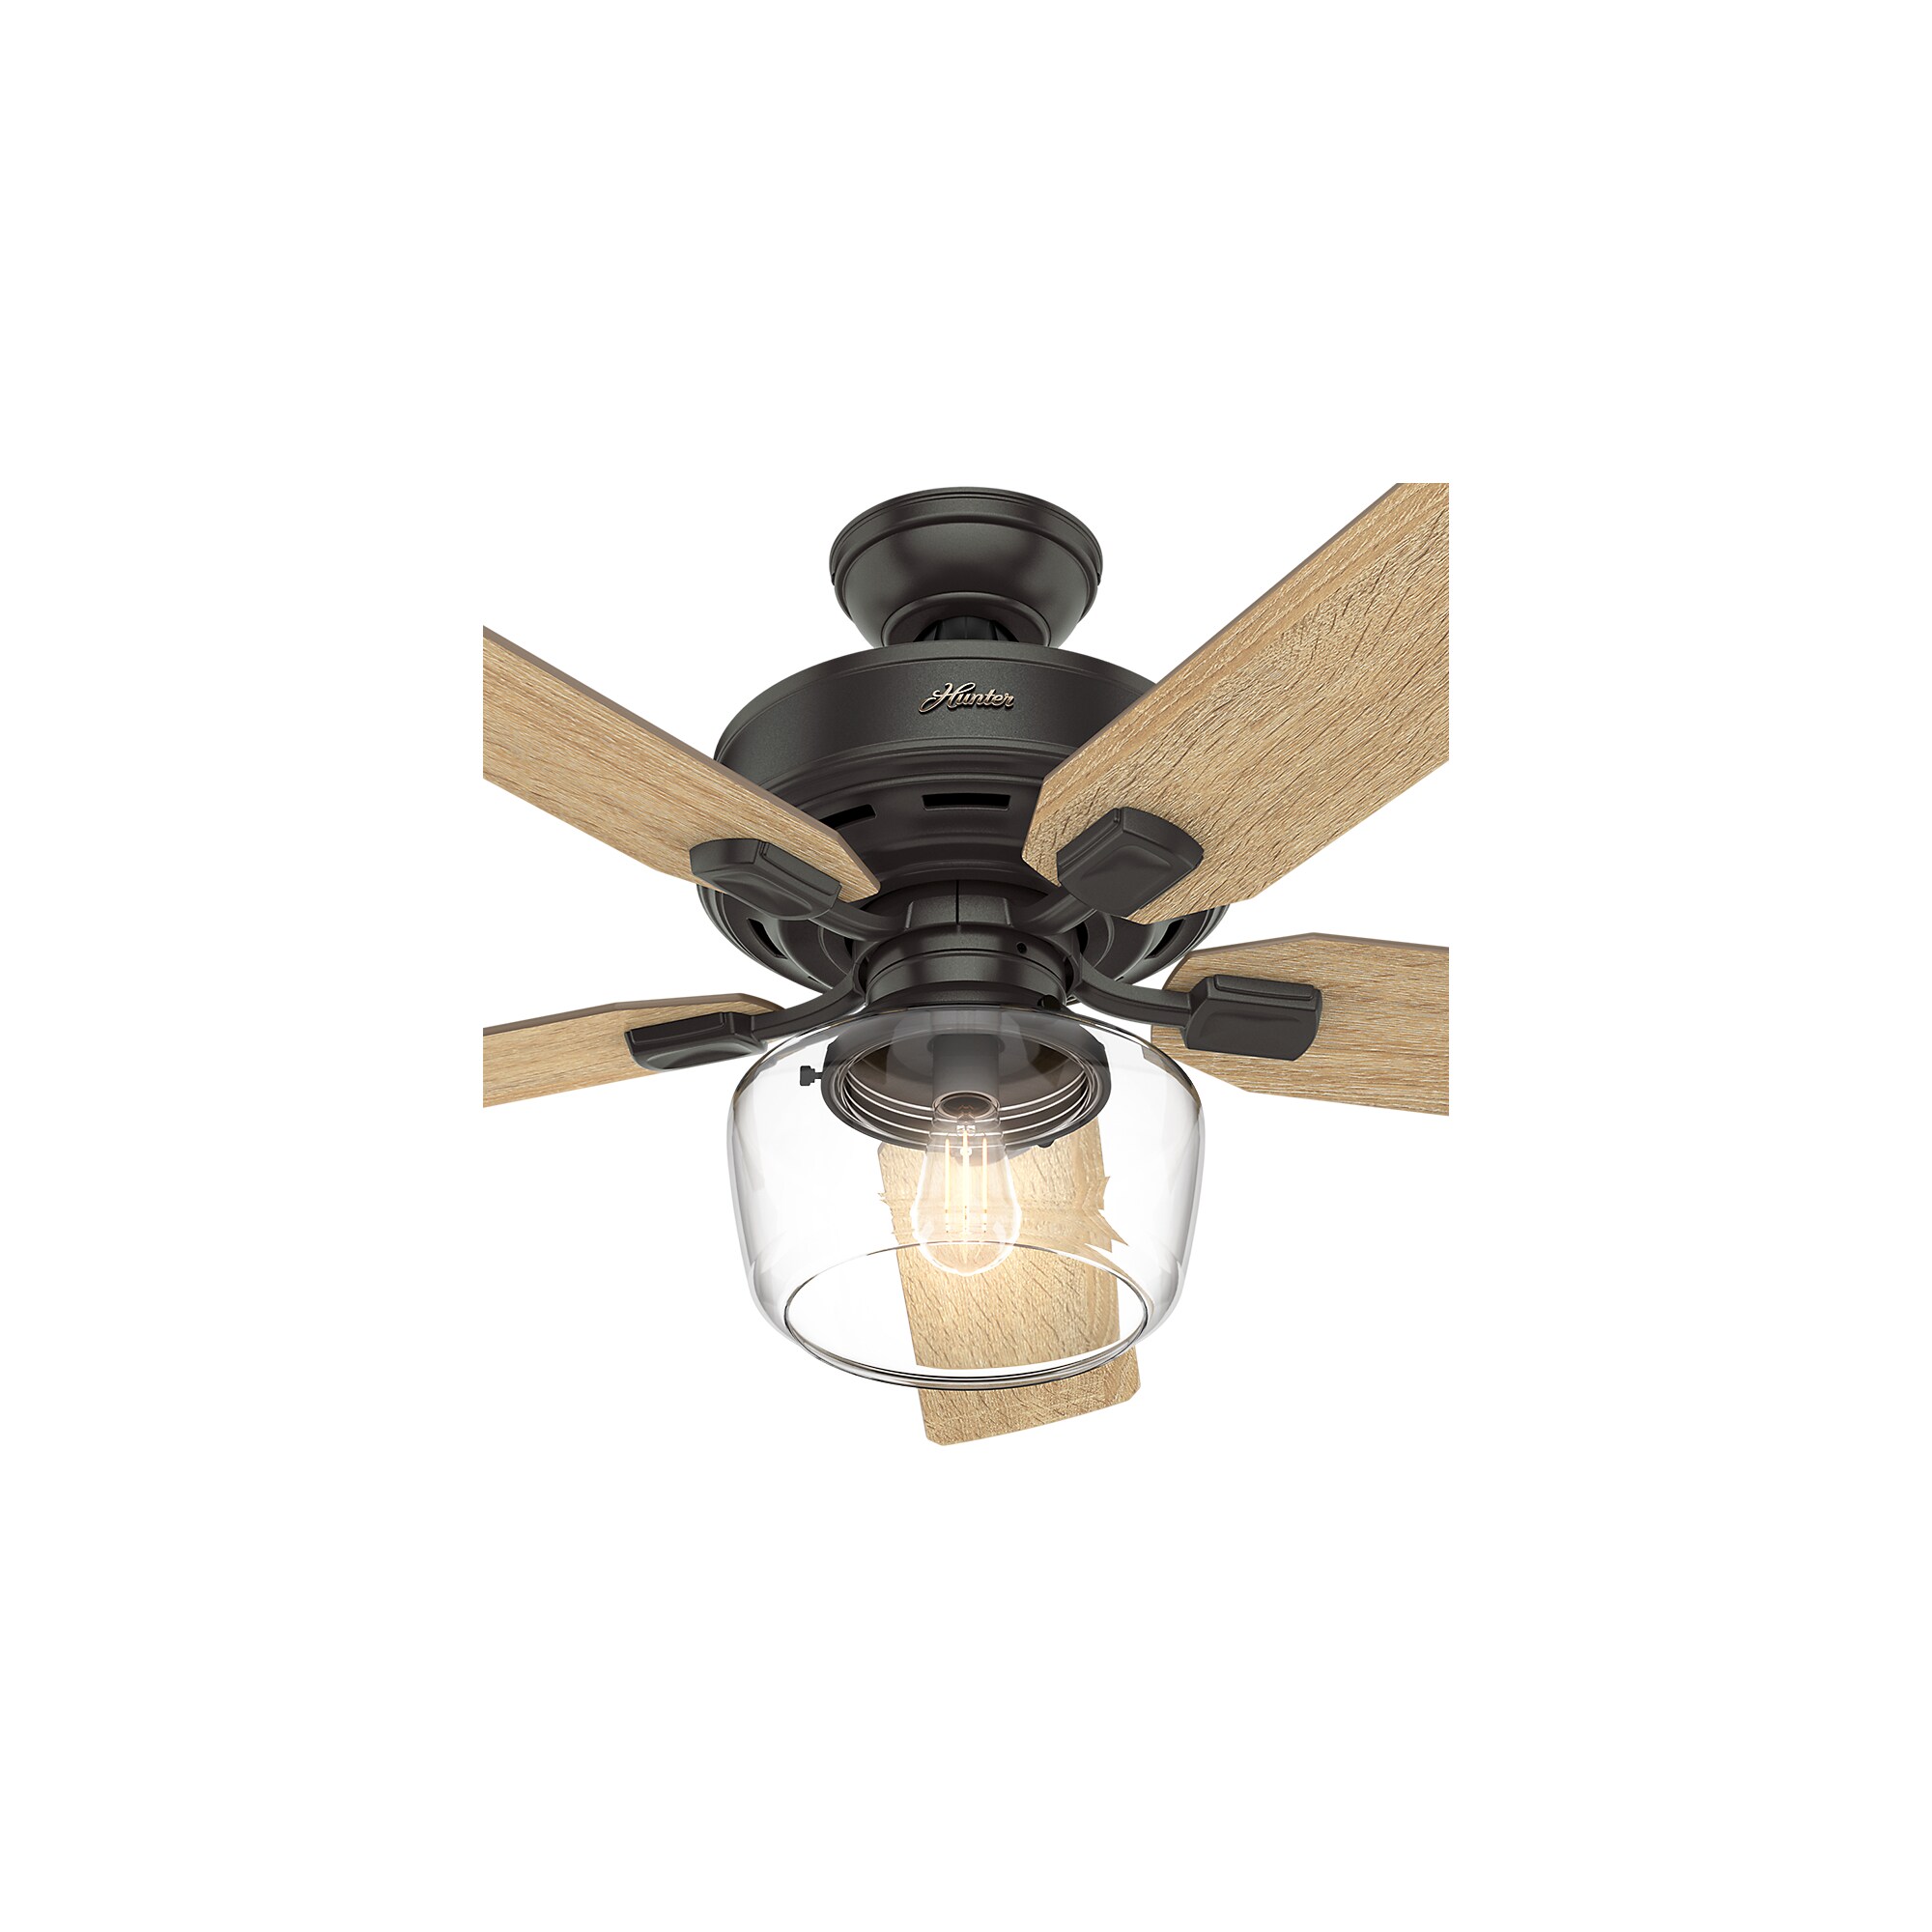 Details about   Hunter Fan 52 in Contemporary Noble Bronze Ceiling Fan with Light Kit and Remote 